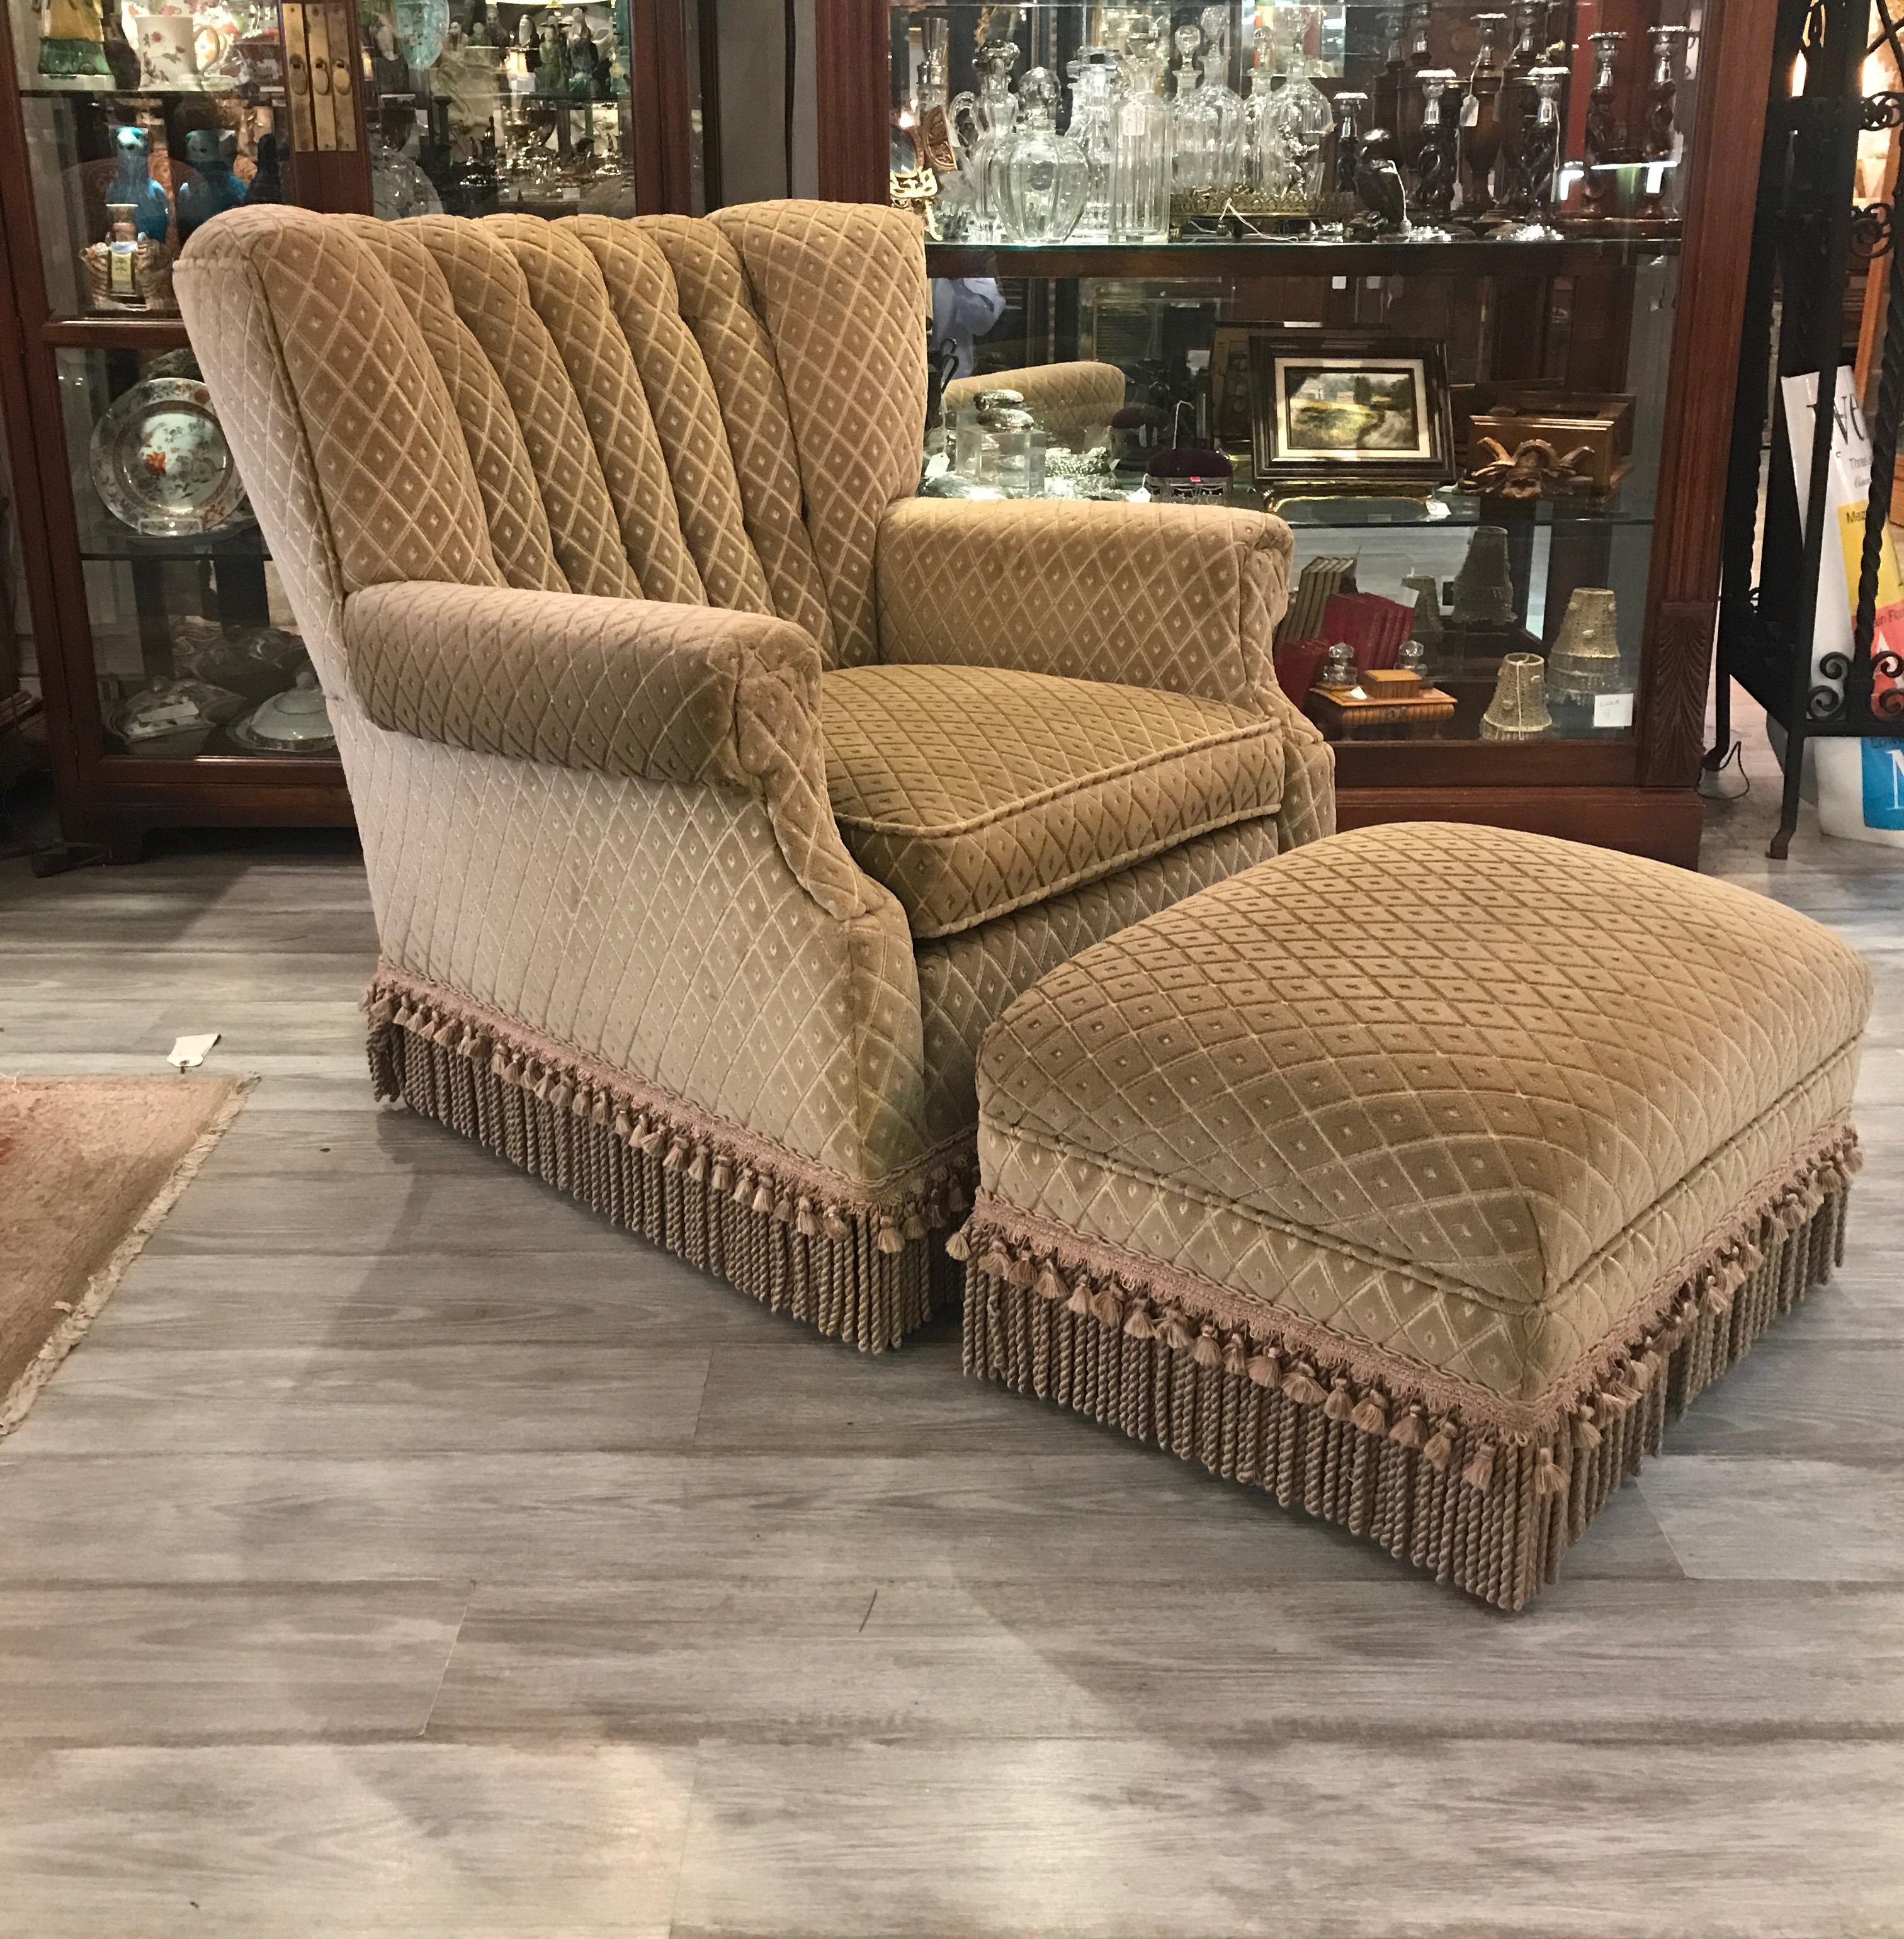 Stylish upholstered chair and ottoman in cut velvet with bouillon fringe. The chair with an 8 way hand tied spring construction and kiln dried hardwood frame made by Swaim. This Art Deco 1940's style the channeled back with a gentle cure for